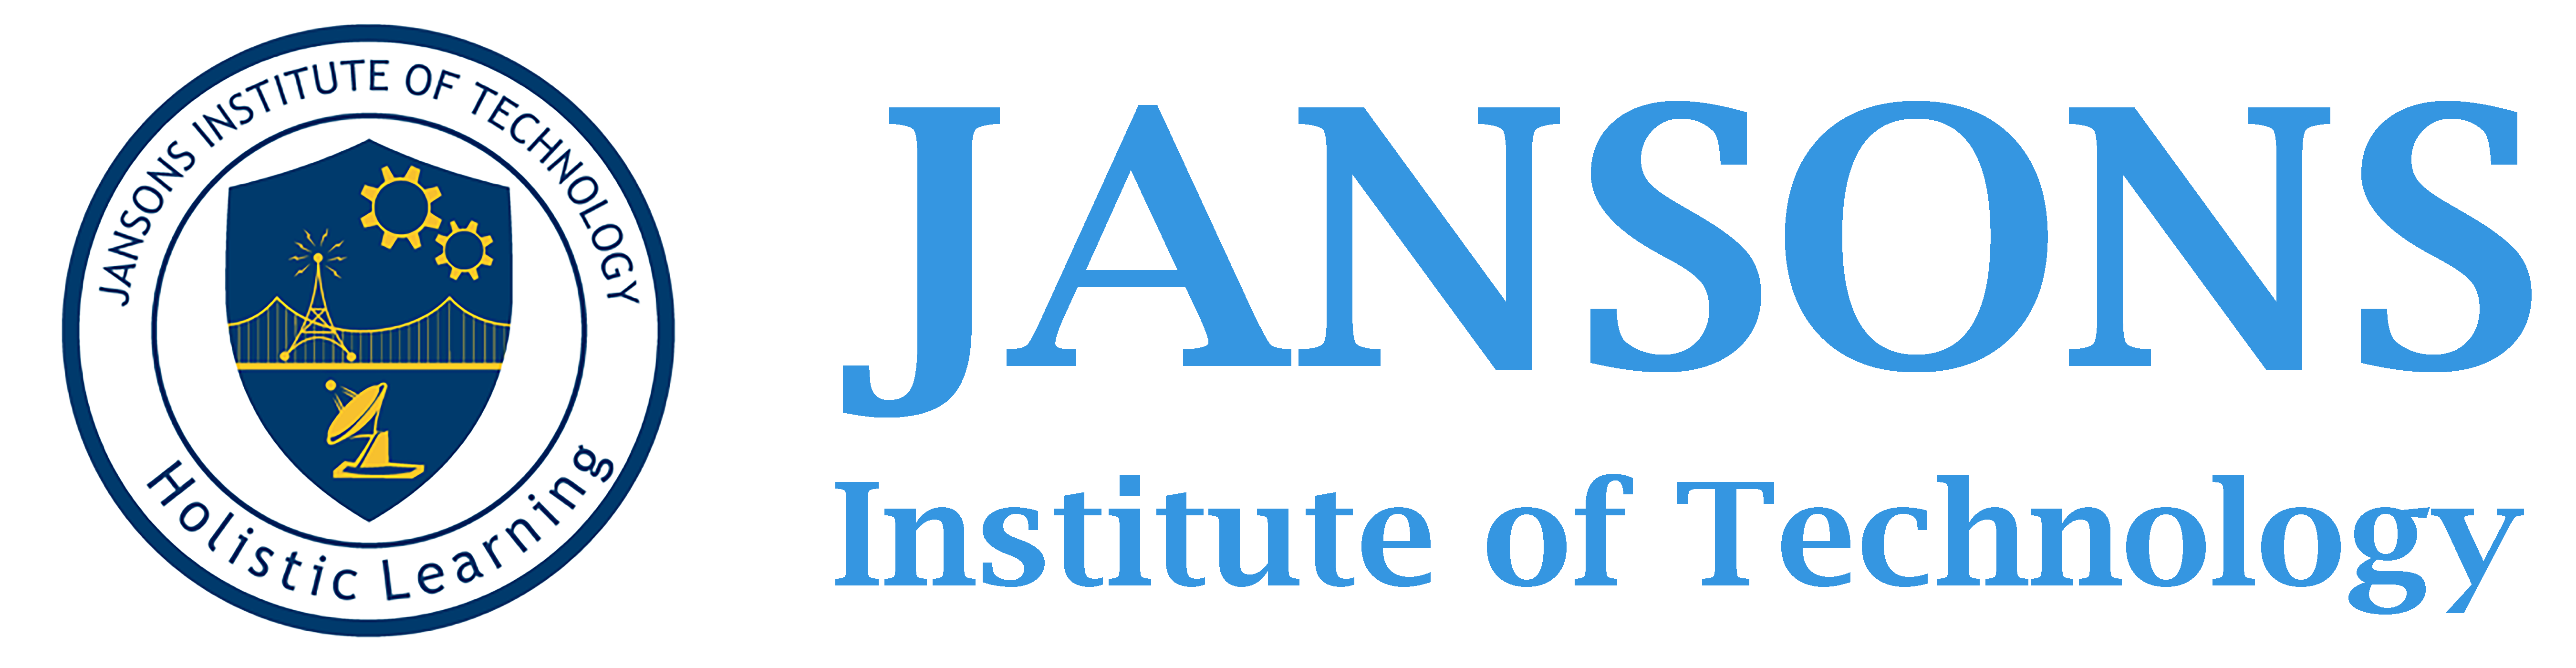 Jansons Institute of Technology